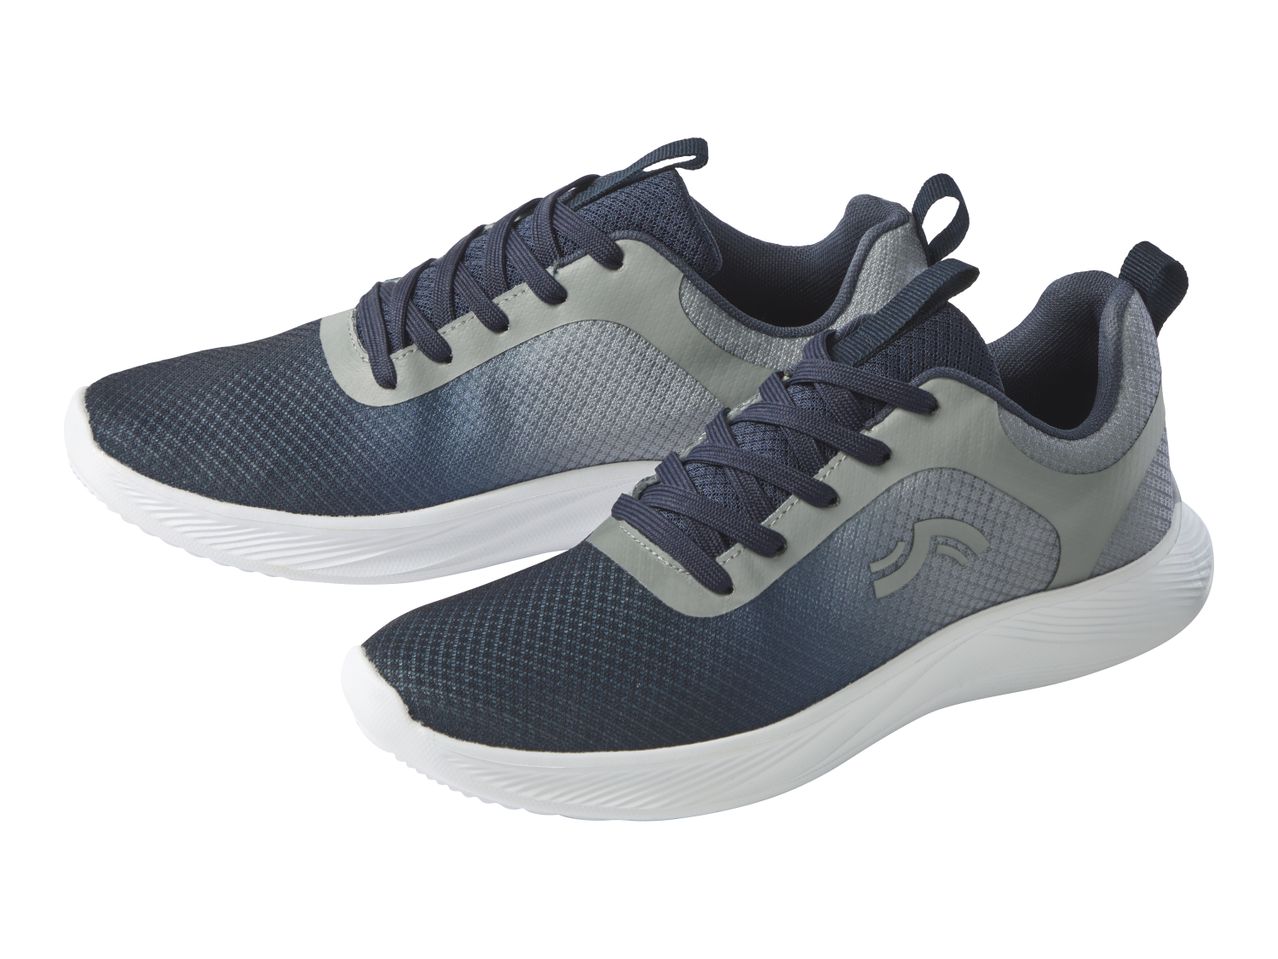 Go to full screen view: Crivit Men’s Trainers - Image 7